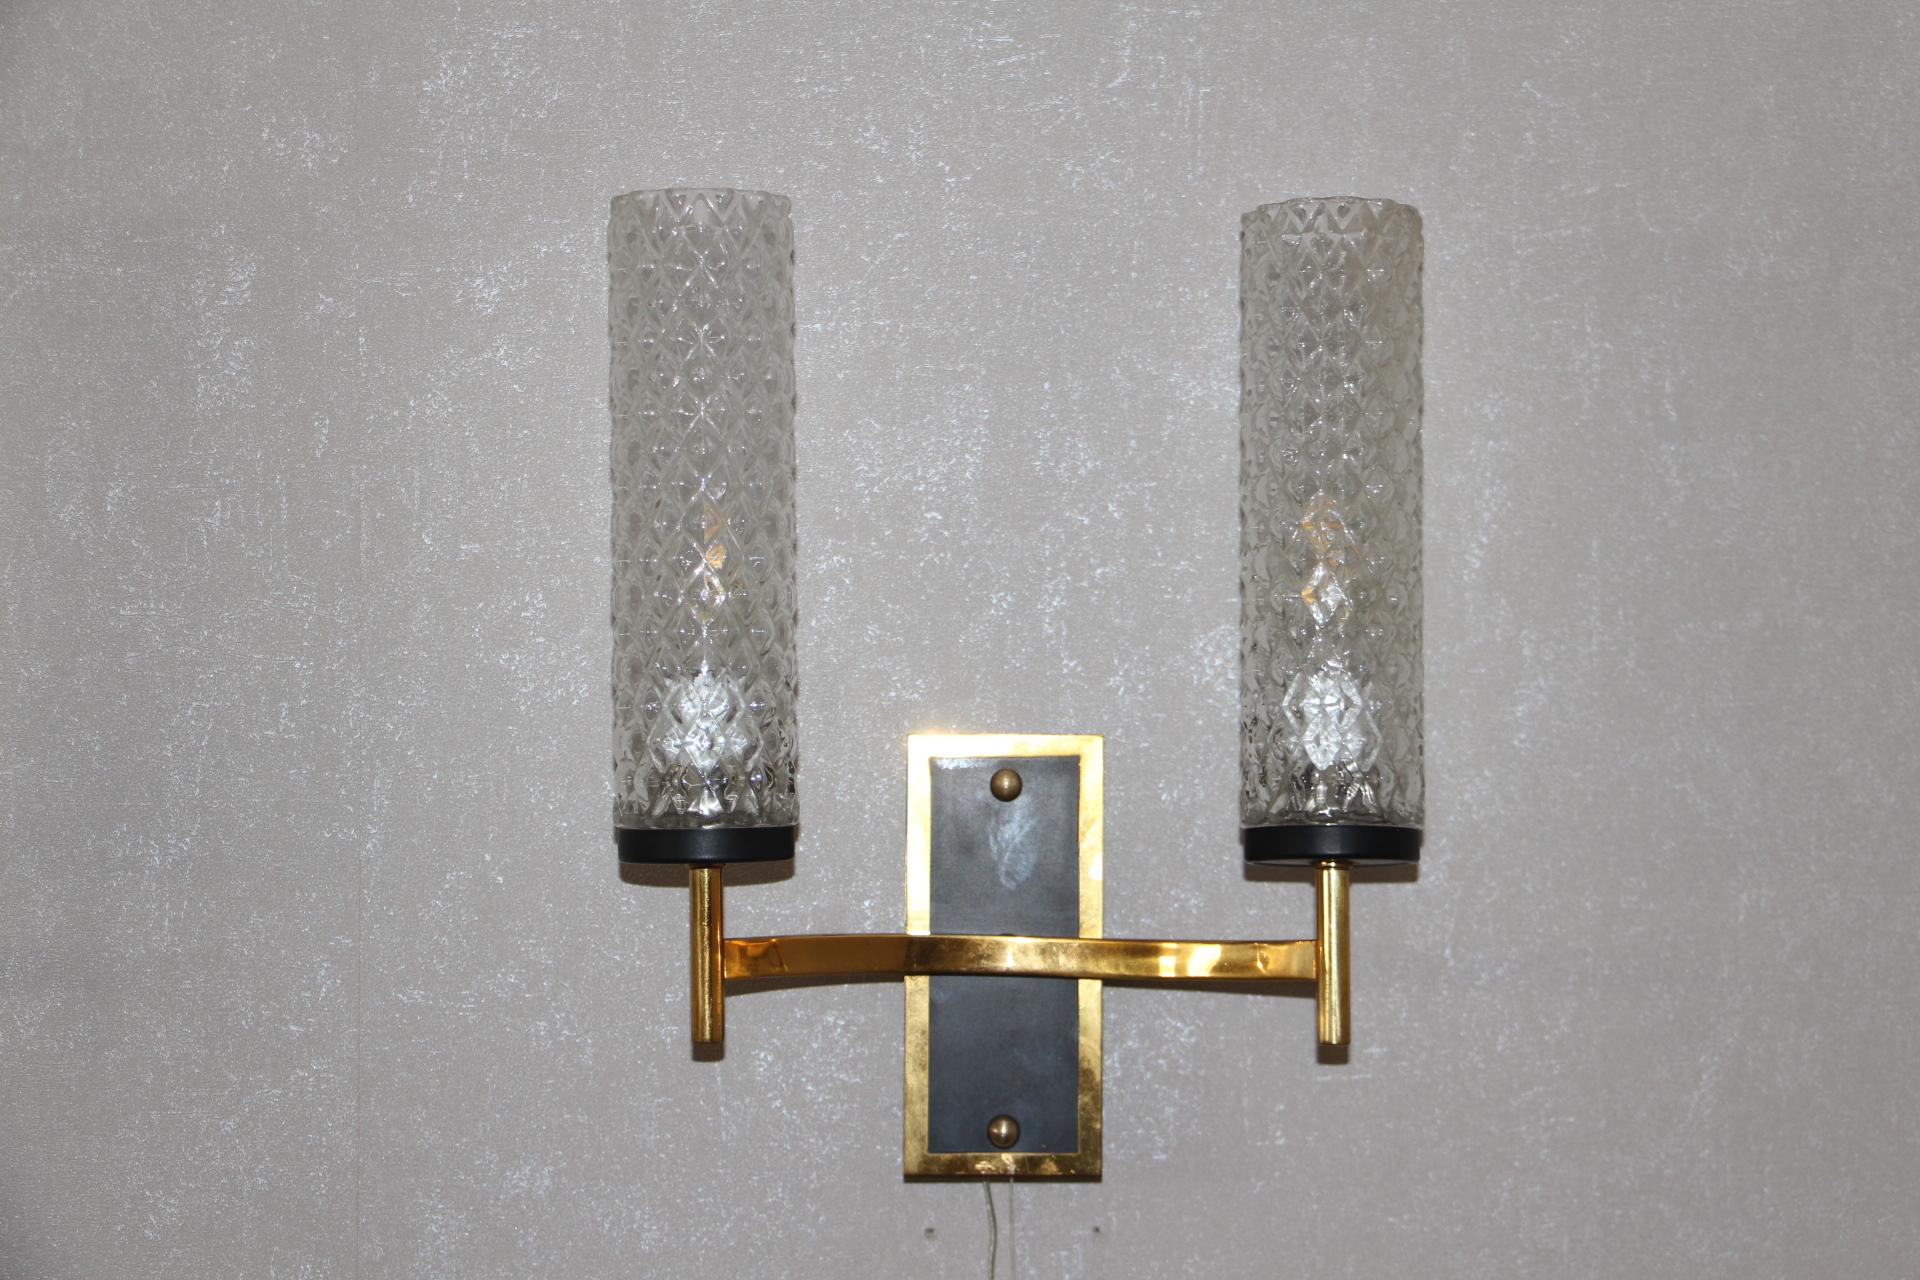 Pair of French Midcentury Sconces, Maison Arlus, Lunel Wall Lights For Sale 3